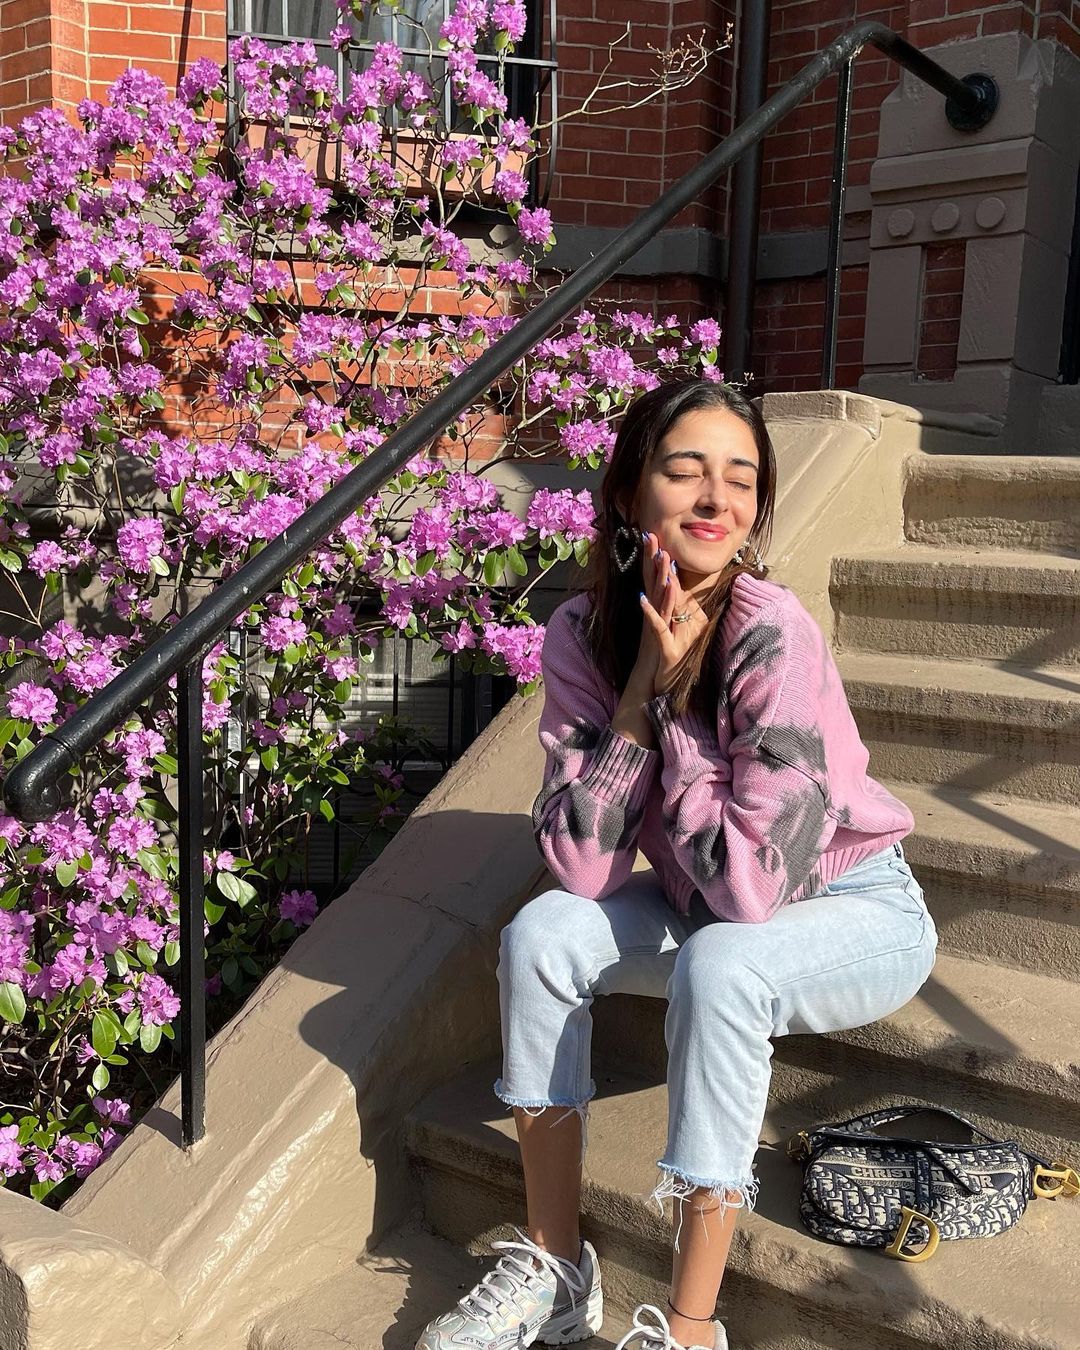  Ananya Panday experiments with her looks and keeps them interesting always. Seen here in a knitted top and ripped denims. (Image: Instagram)